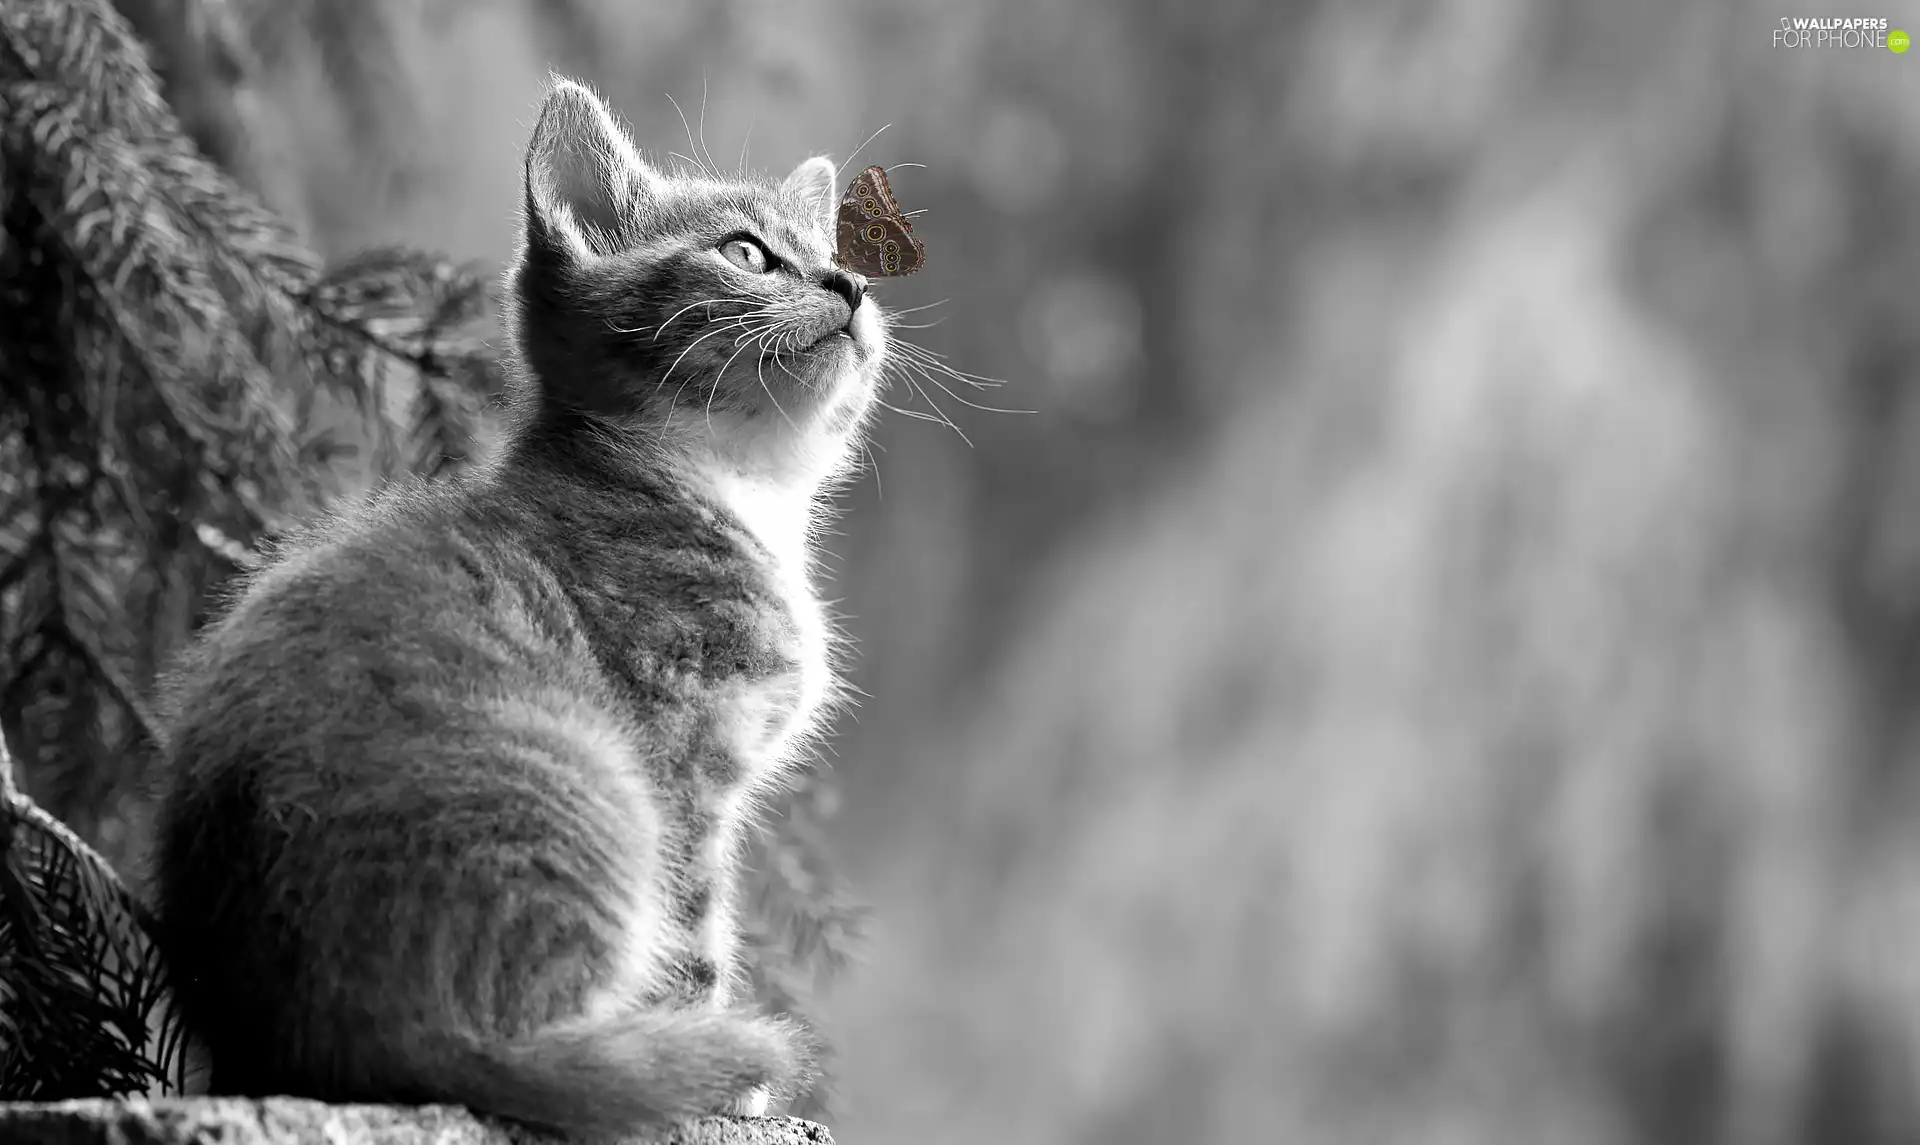 Black and white, butterfly, blurry background, kitten